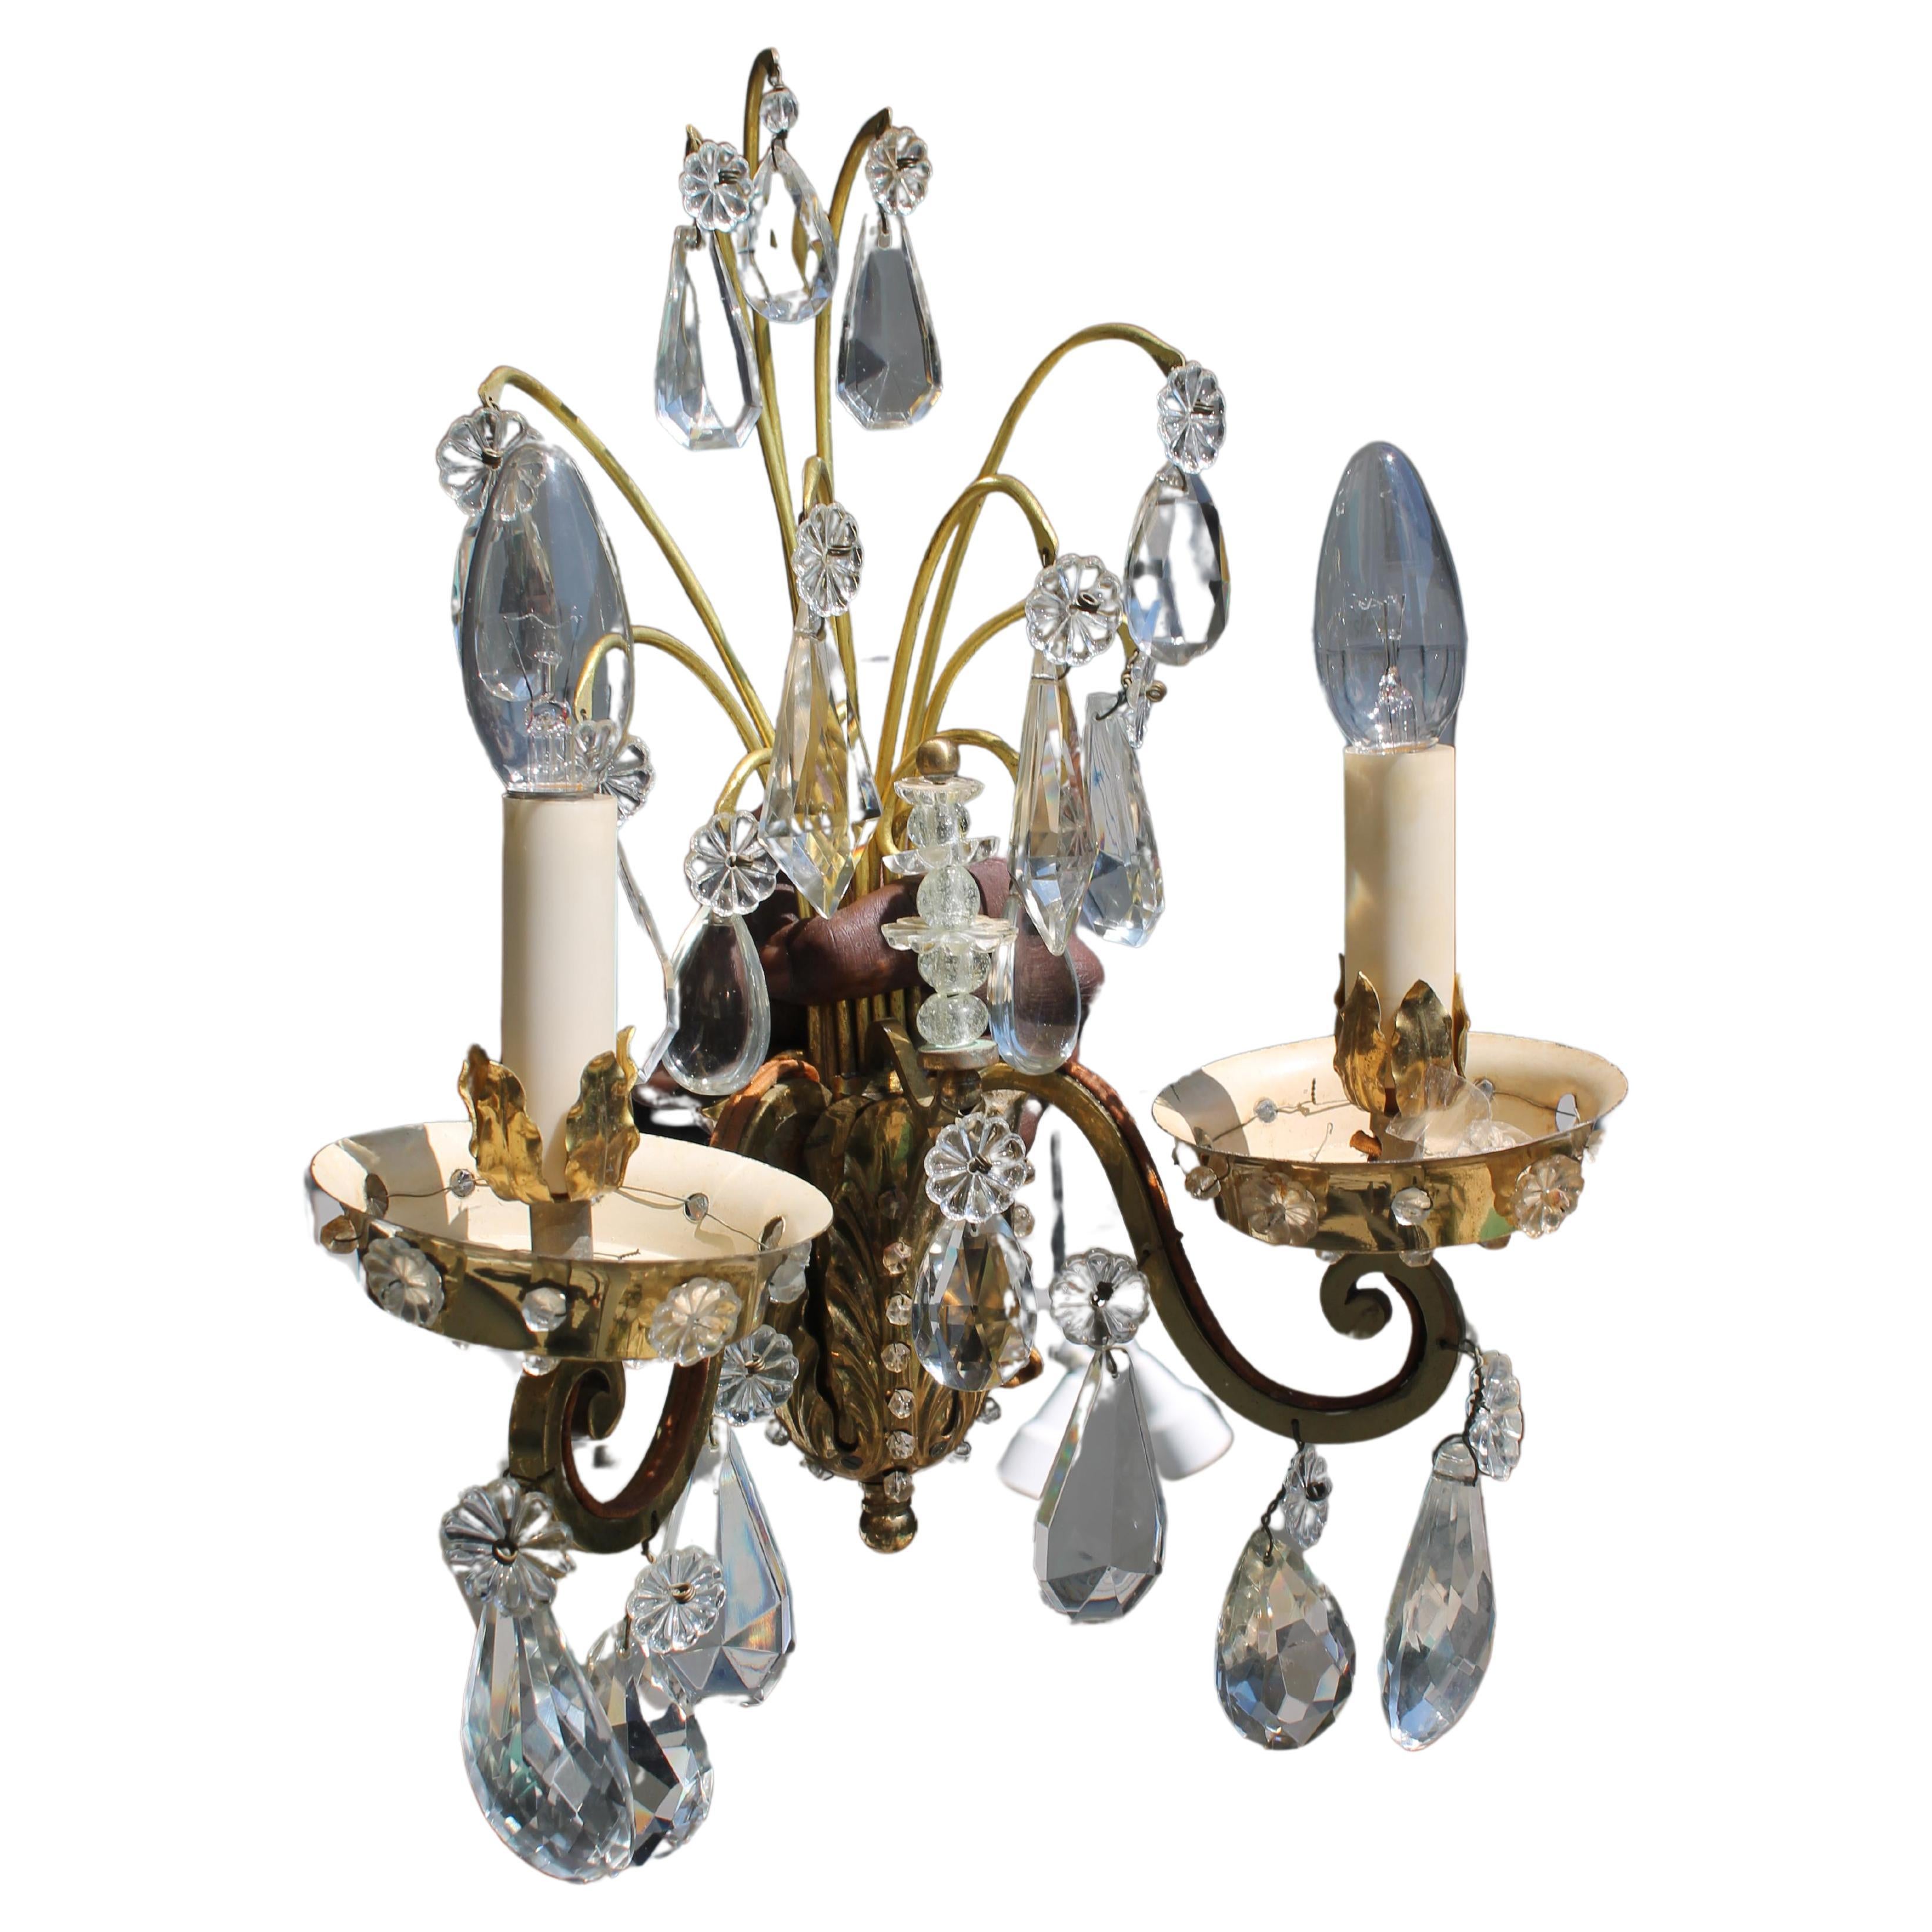 Pair of Large French Gilt Bronze with Cut Crystal Floral Decor Wall Sconces by Maison Bagues Paris. These are stunning! Statement lighting by France' finest. French estate.